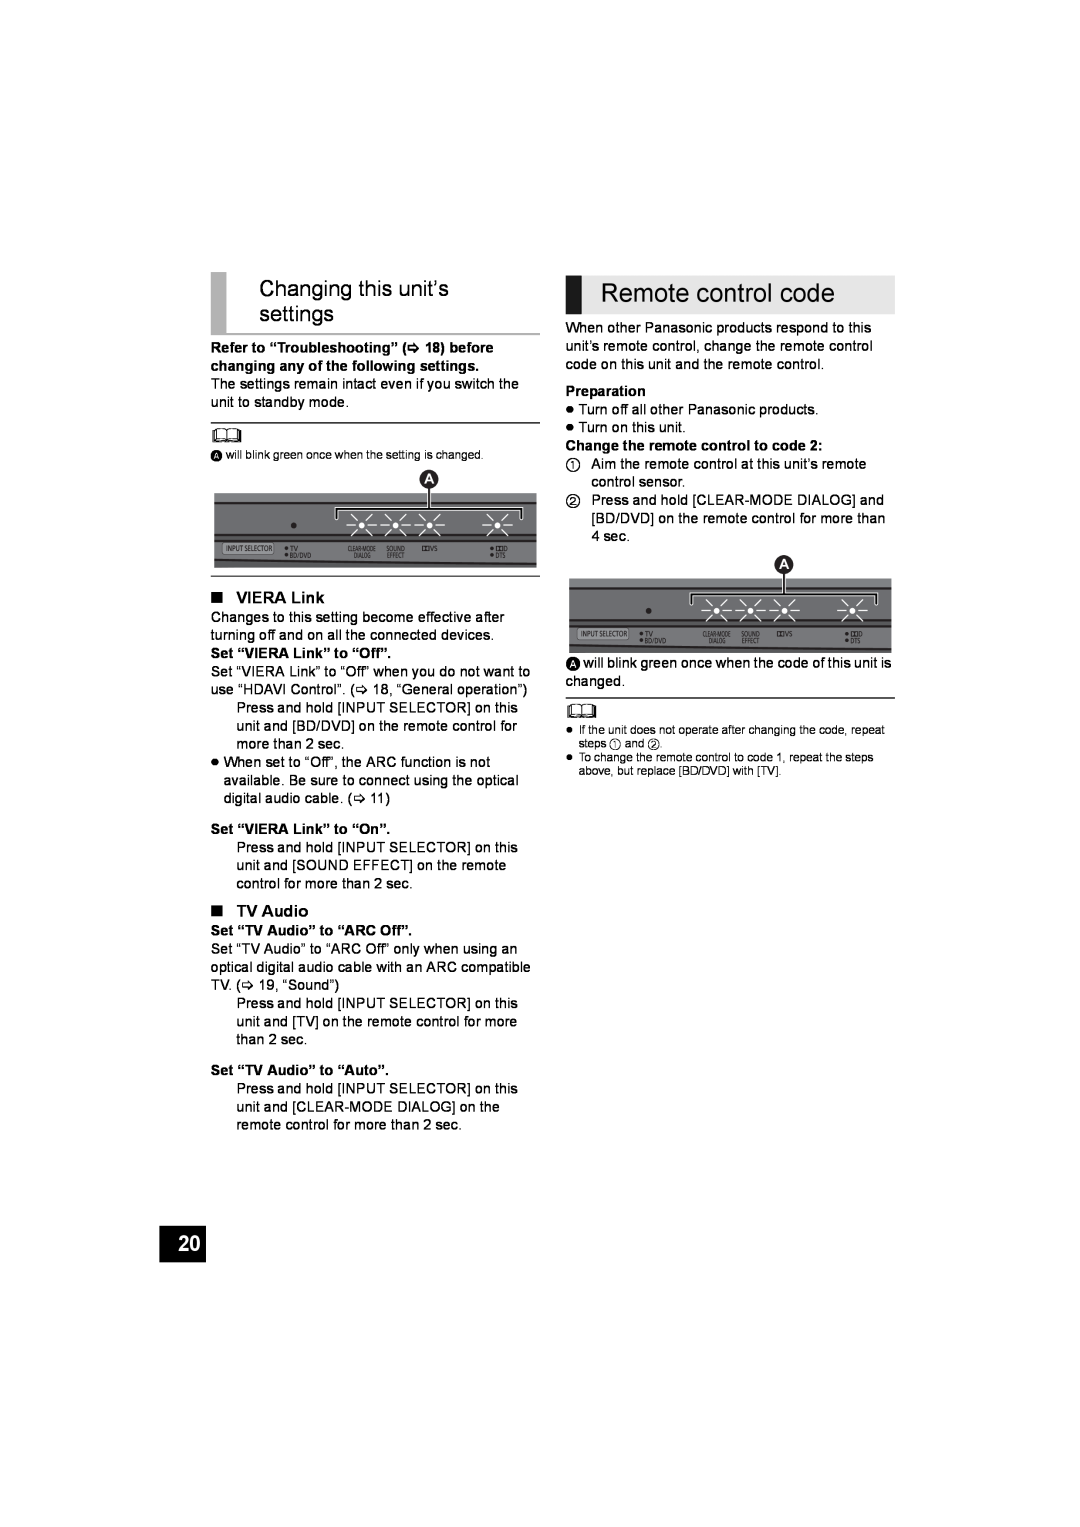 Panasonic SC-HTB500 operating instructions Remote control code, Changing this unit’s settings 